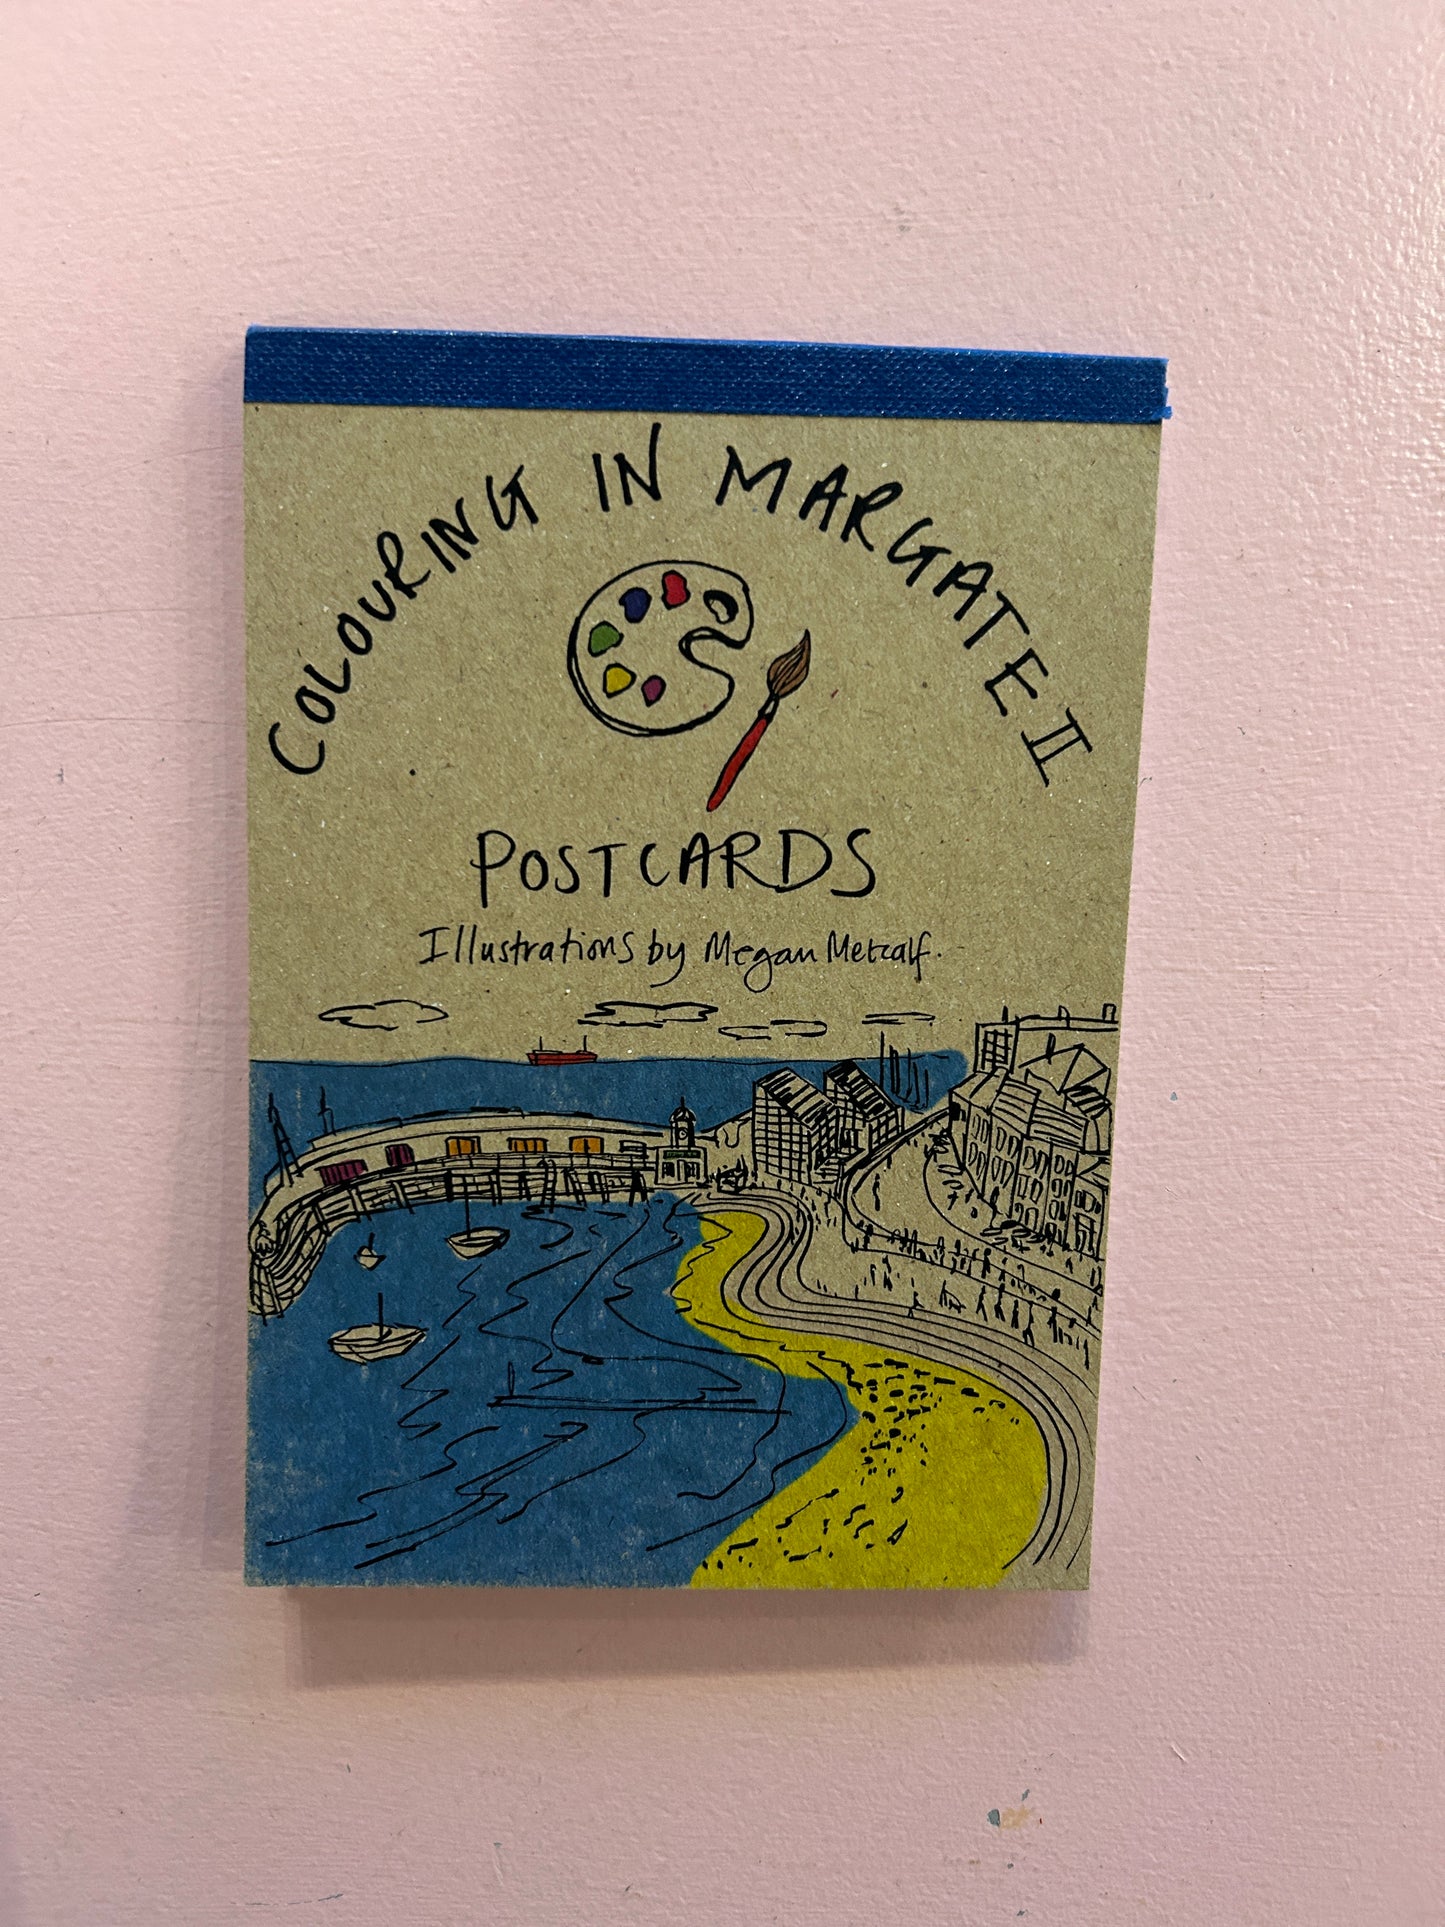 Colouring in Margate Postcards by Megan Metcalf